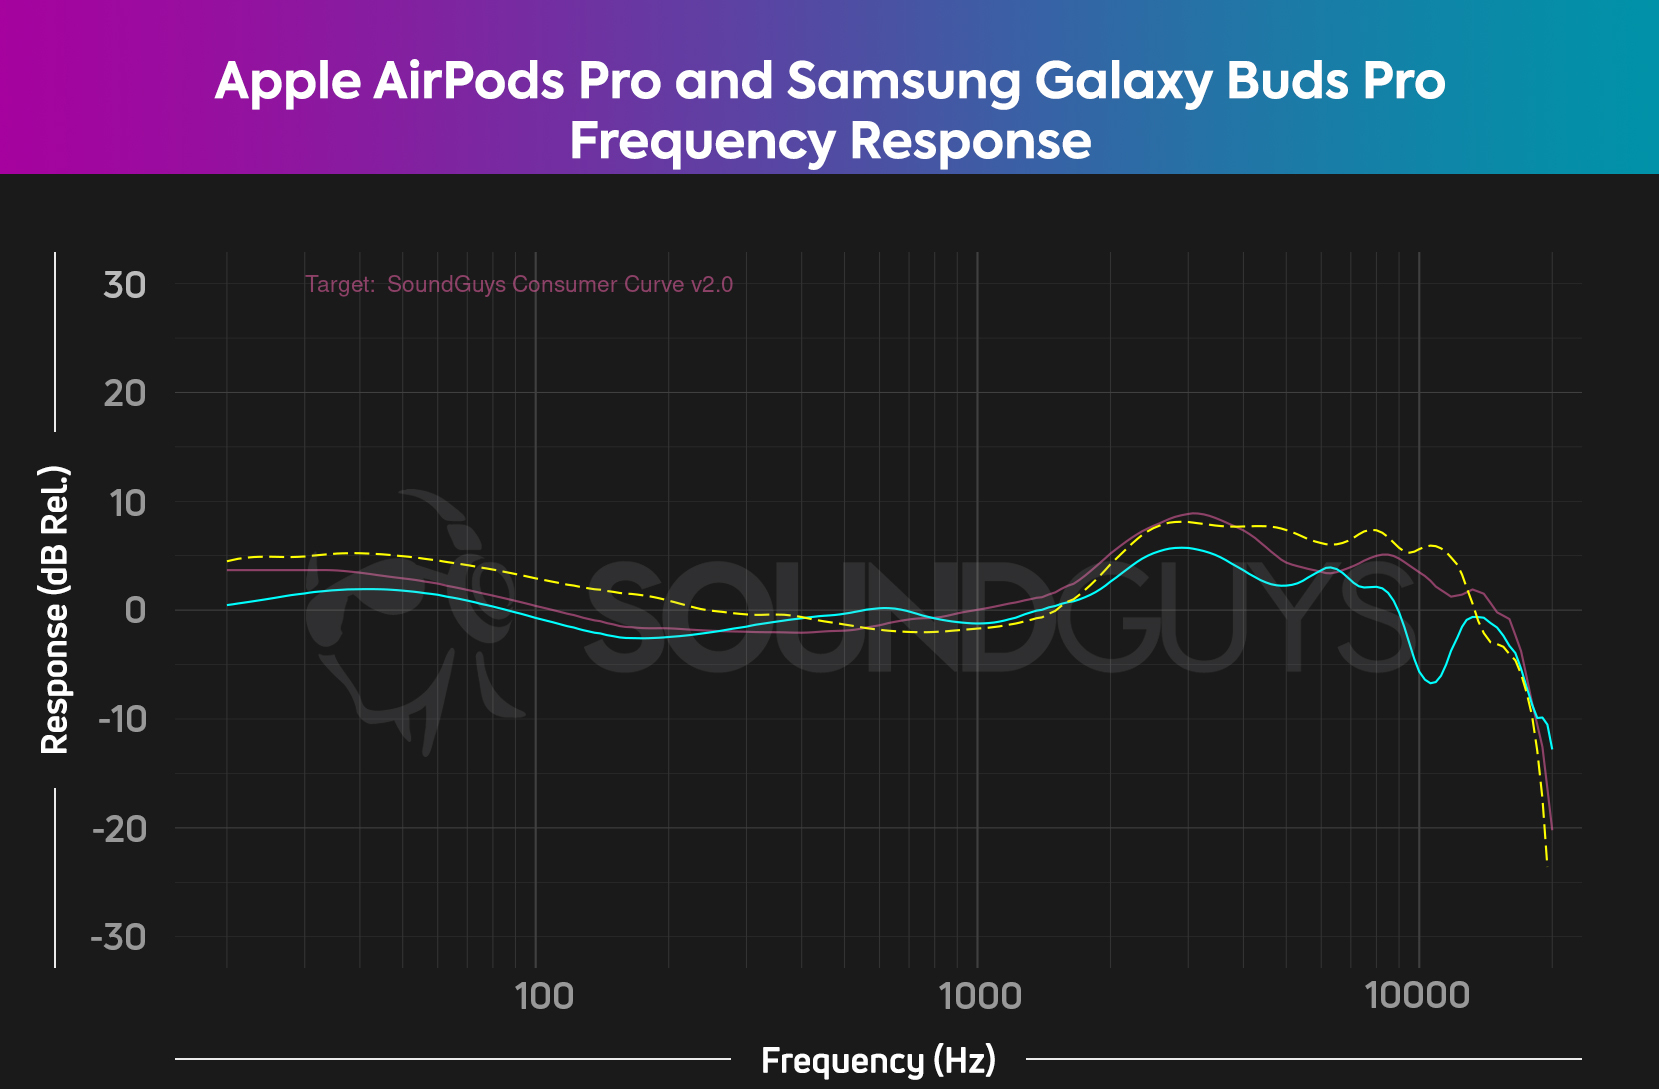 A chart showing the frequency responses of the Apple AirPods Pro and Samsung Galaxy Buds Pro compared to the SoundGuys' house curve.